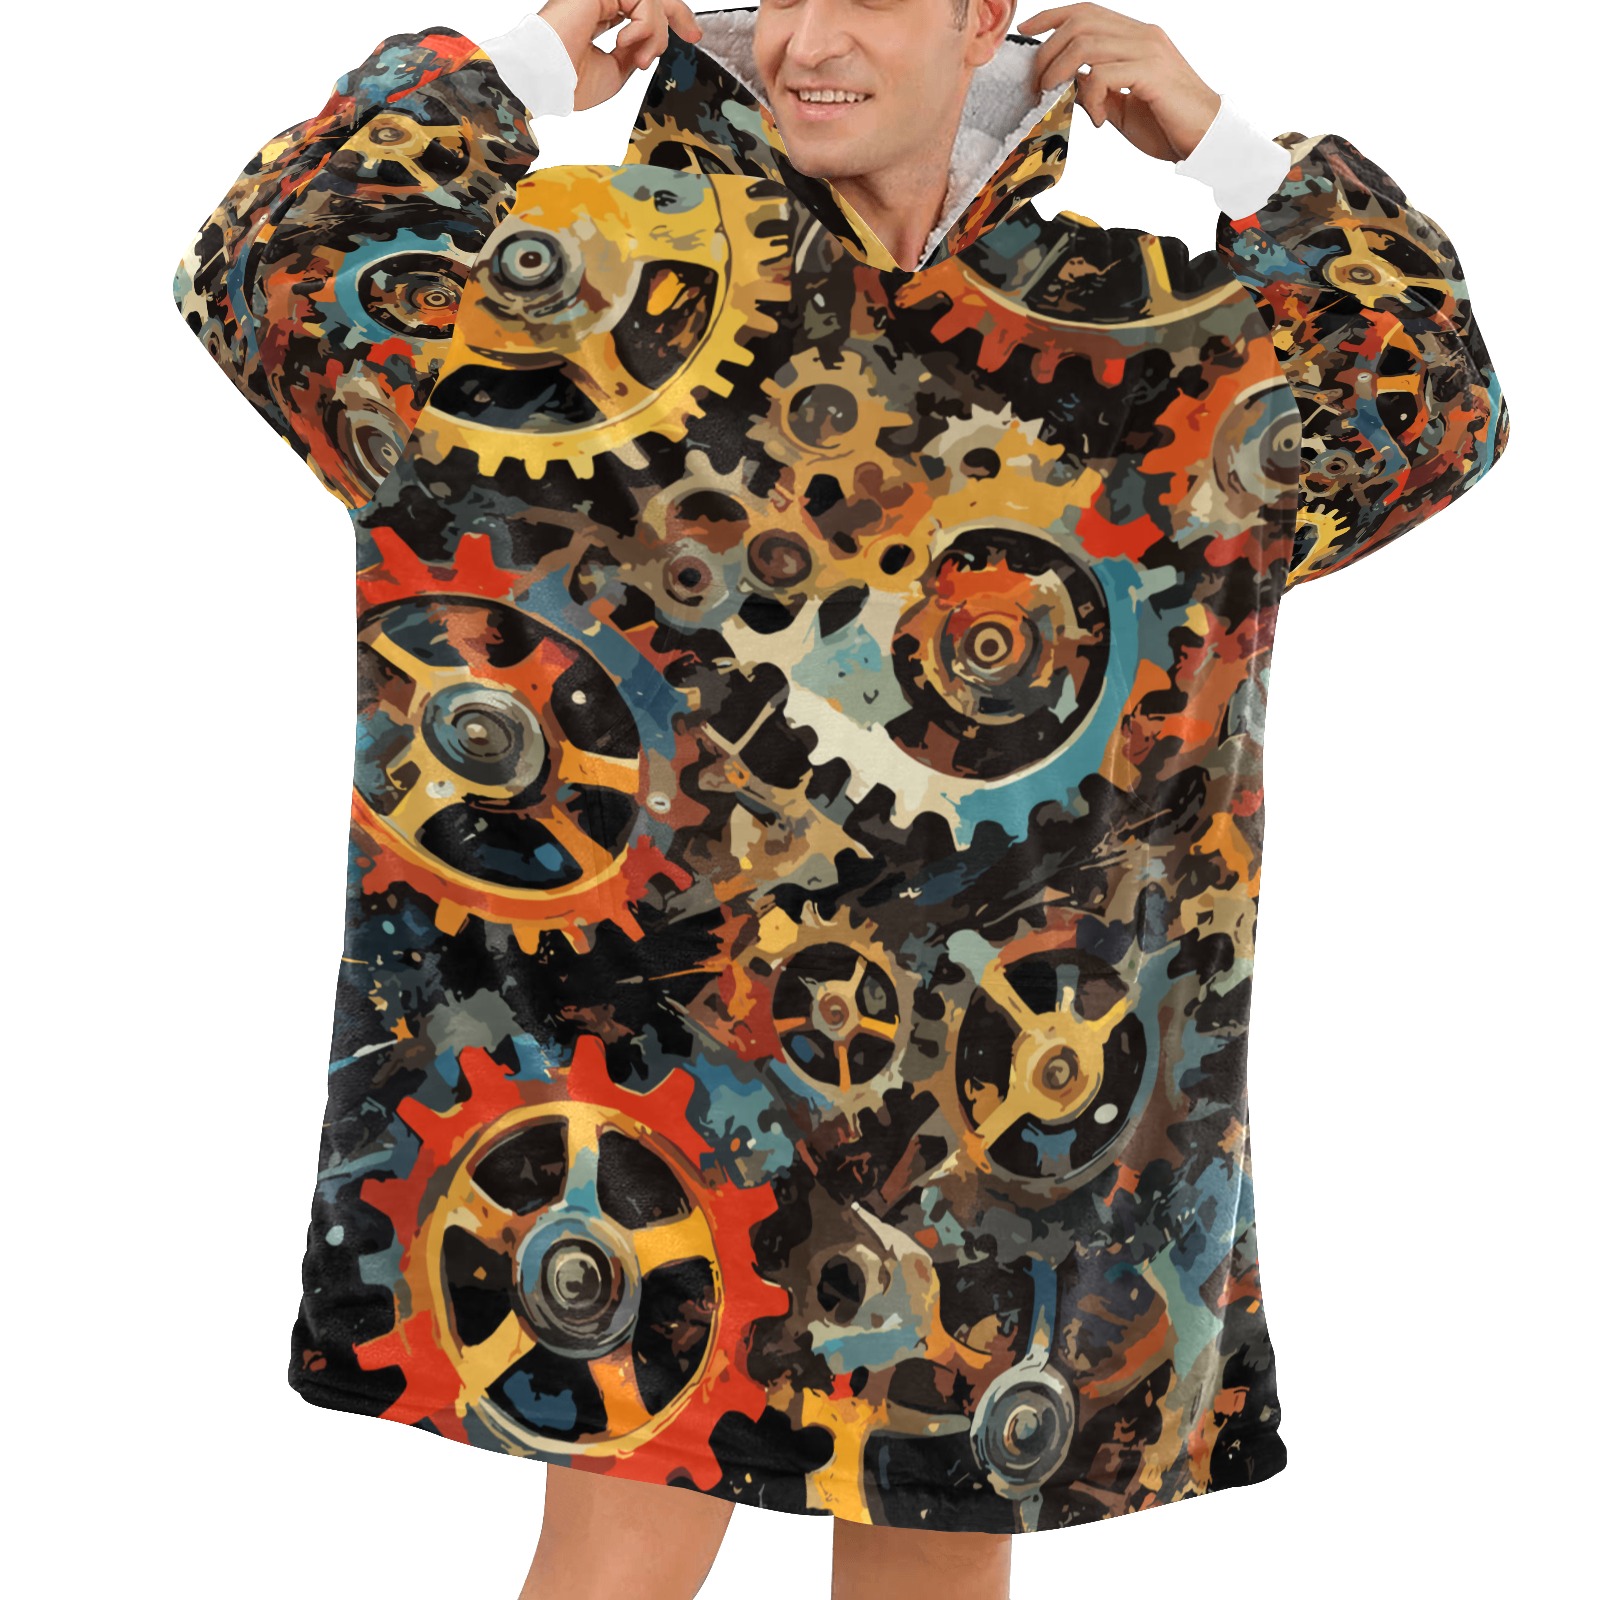 Cool Vintage Mechanical Gear Colorful Abstract Art Blanket Hoodie for Men